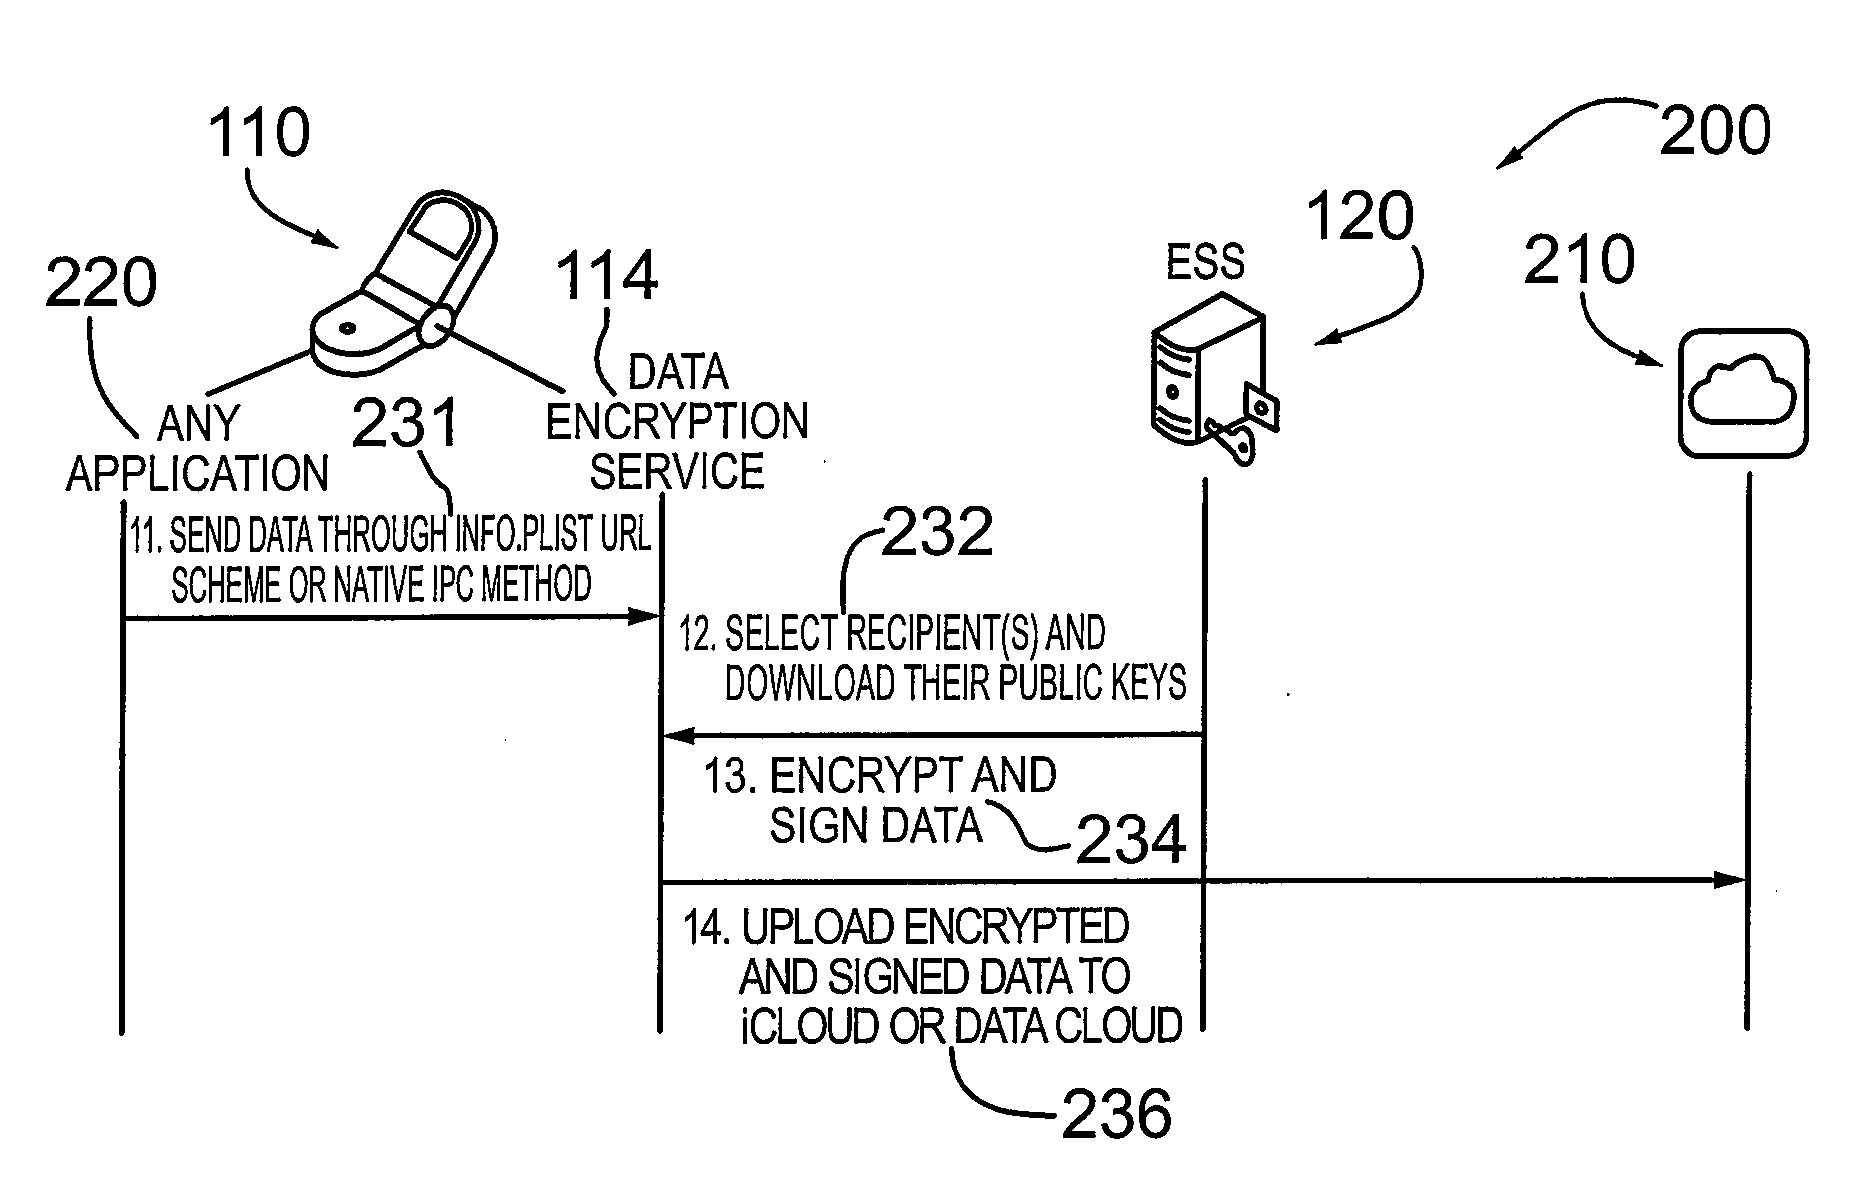 METHOD AND SYSTEM FOR CREDENTIAL MANAGEMENT AND DATA ENCRYPTION FOR iOS BASED DEVICES